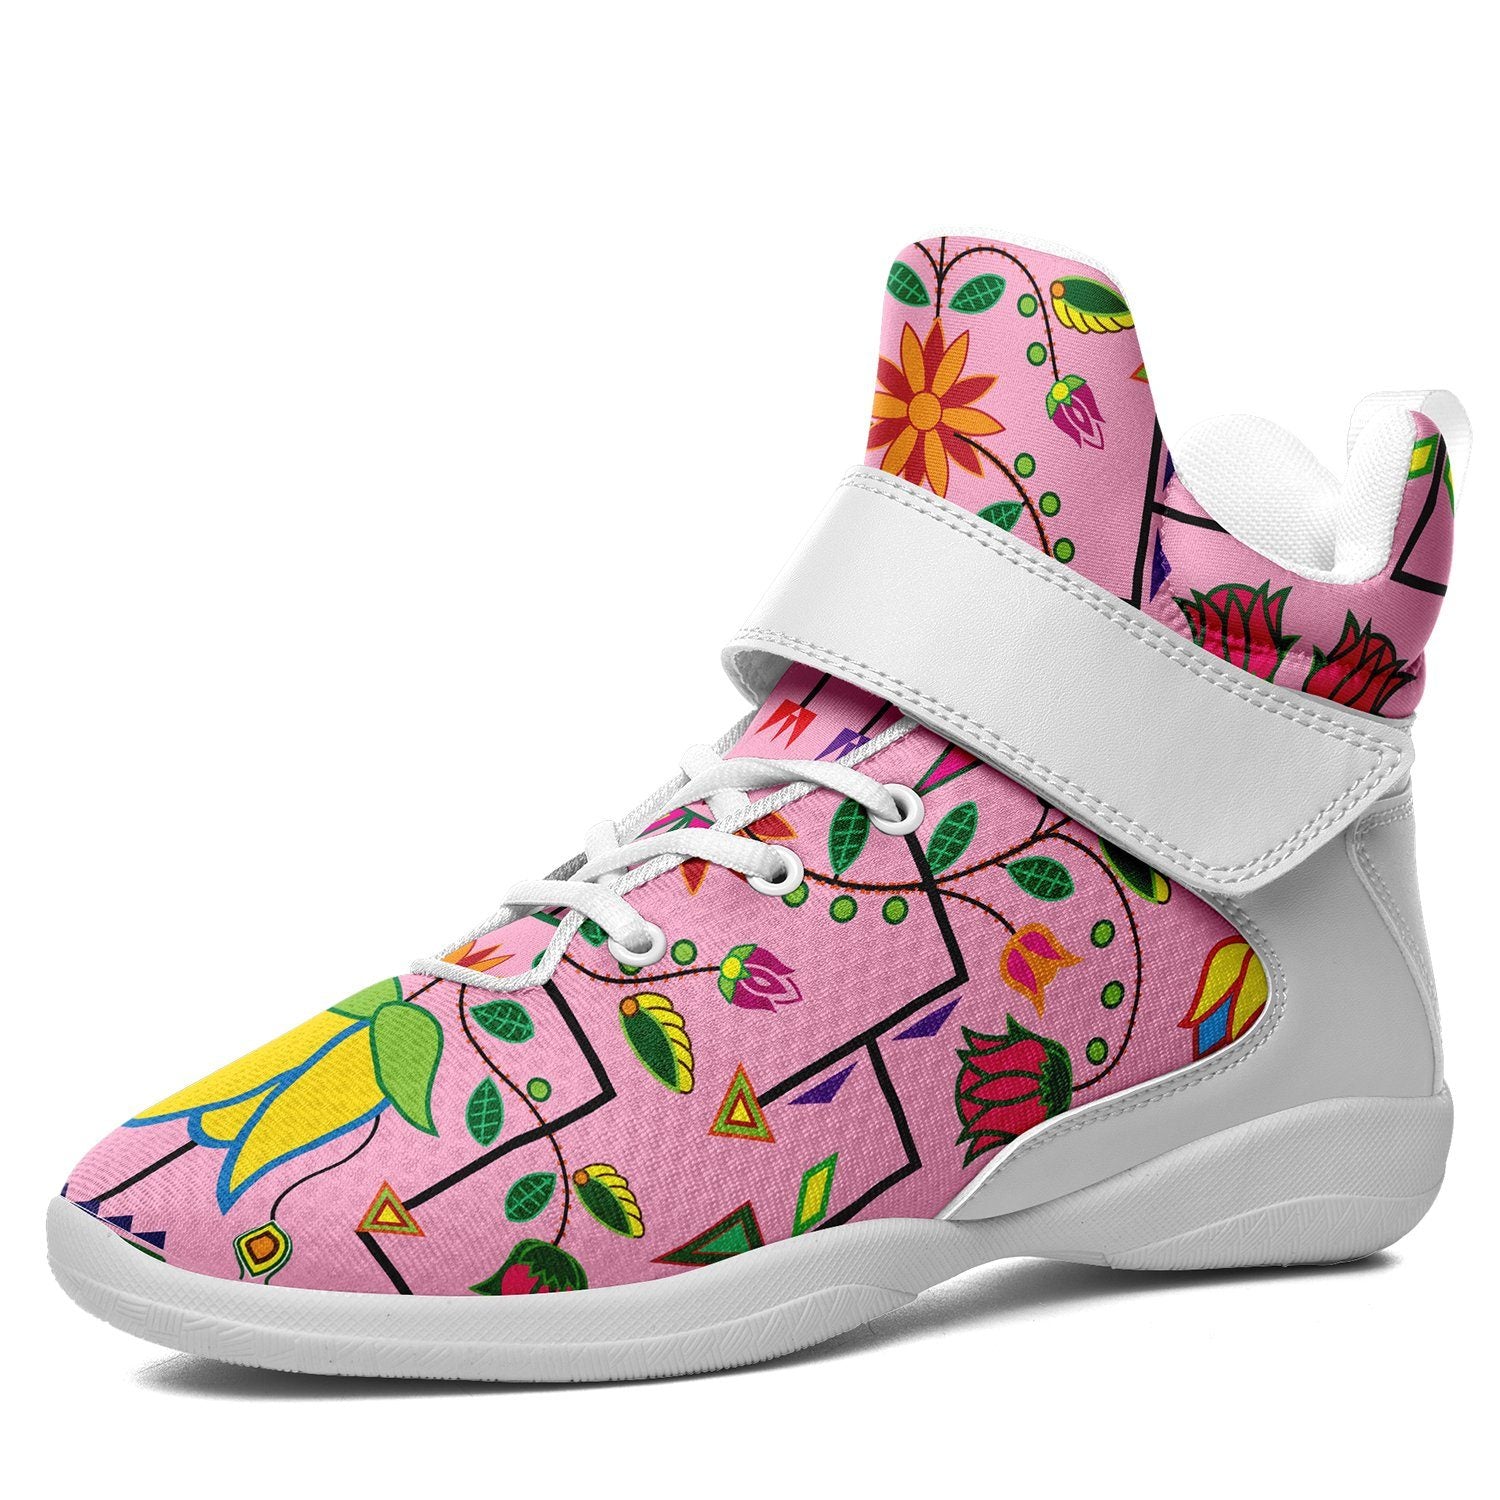 Geometric Floral Summer Sunset Ipottaa Basketball / Sport High Top Shoes 49 Dzine US Women 4.5 / US Youth 3.5 / EUR 35 White Sole with White Strap 